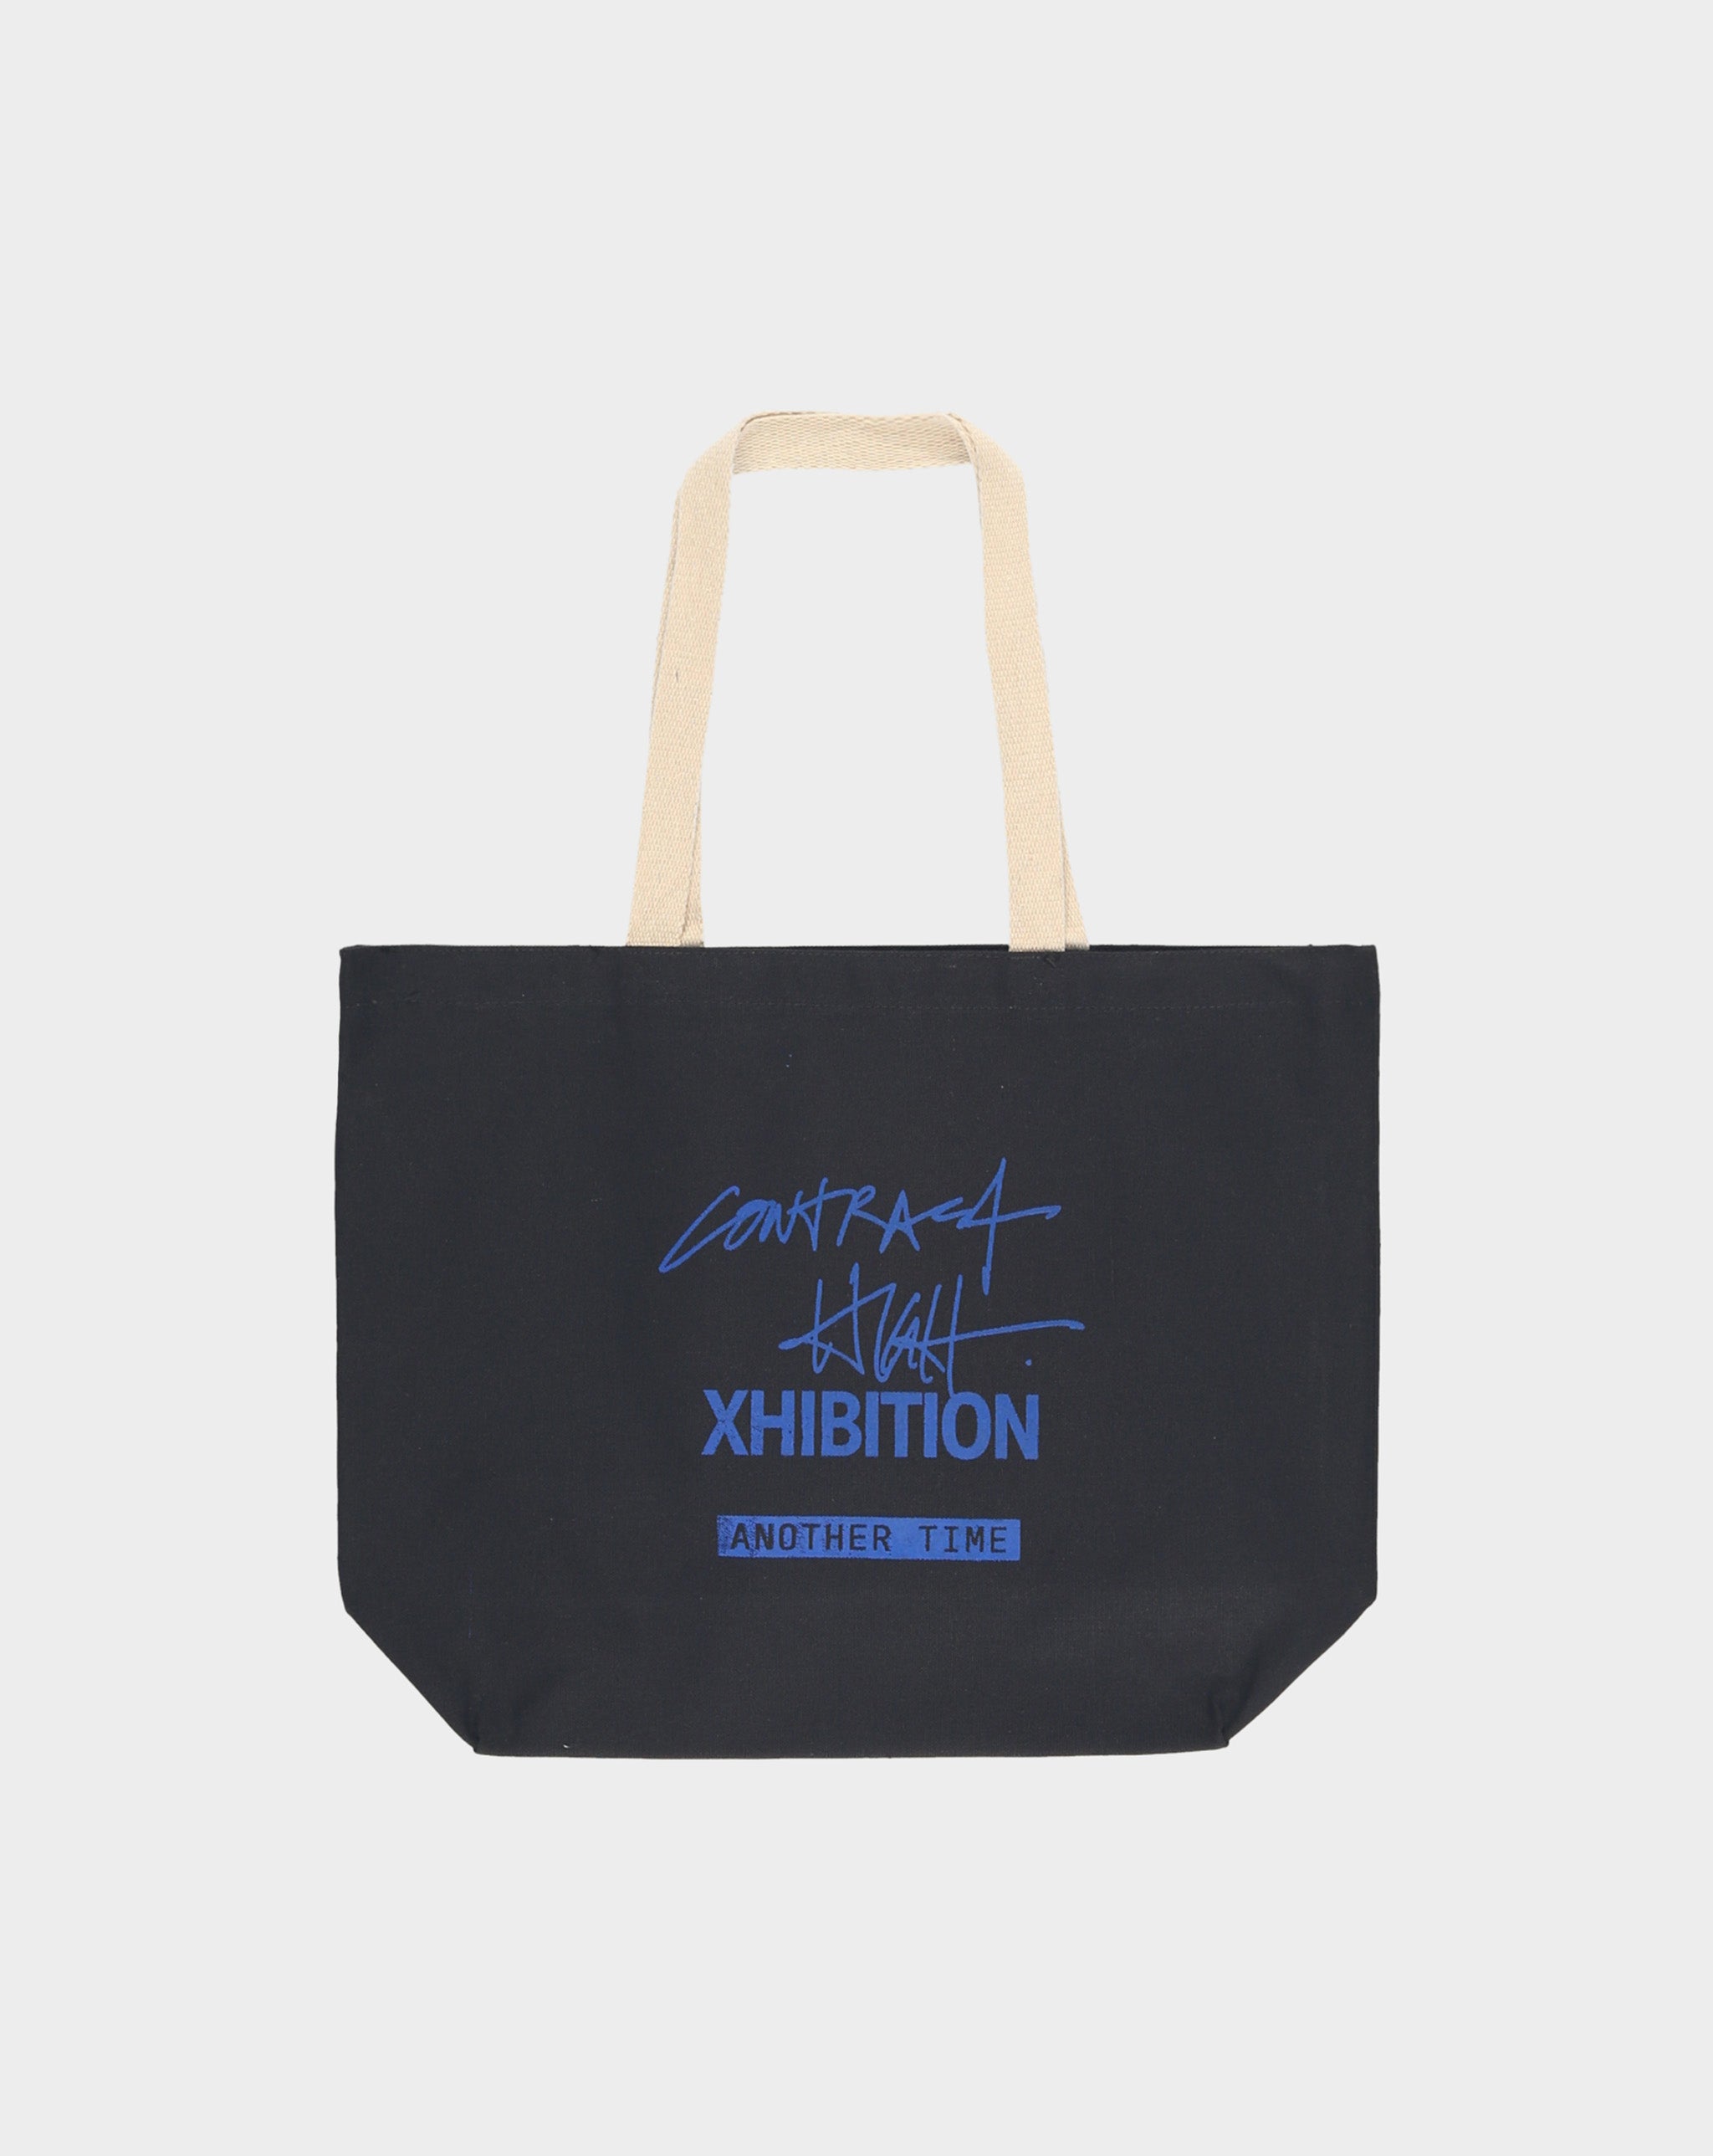 Contrast High CHxX Tote Bag  - XHIBITION